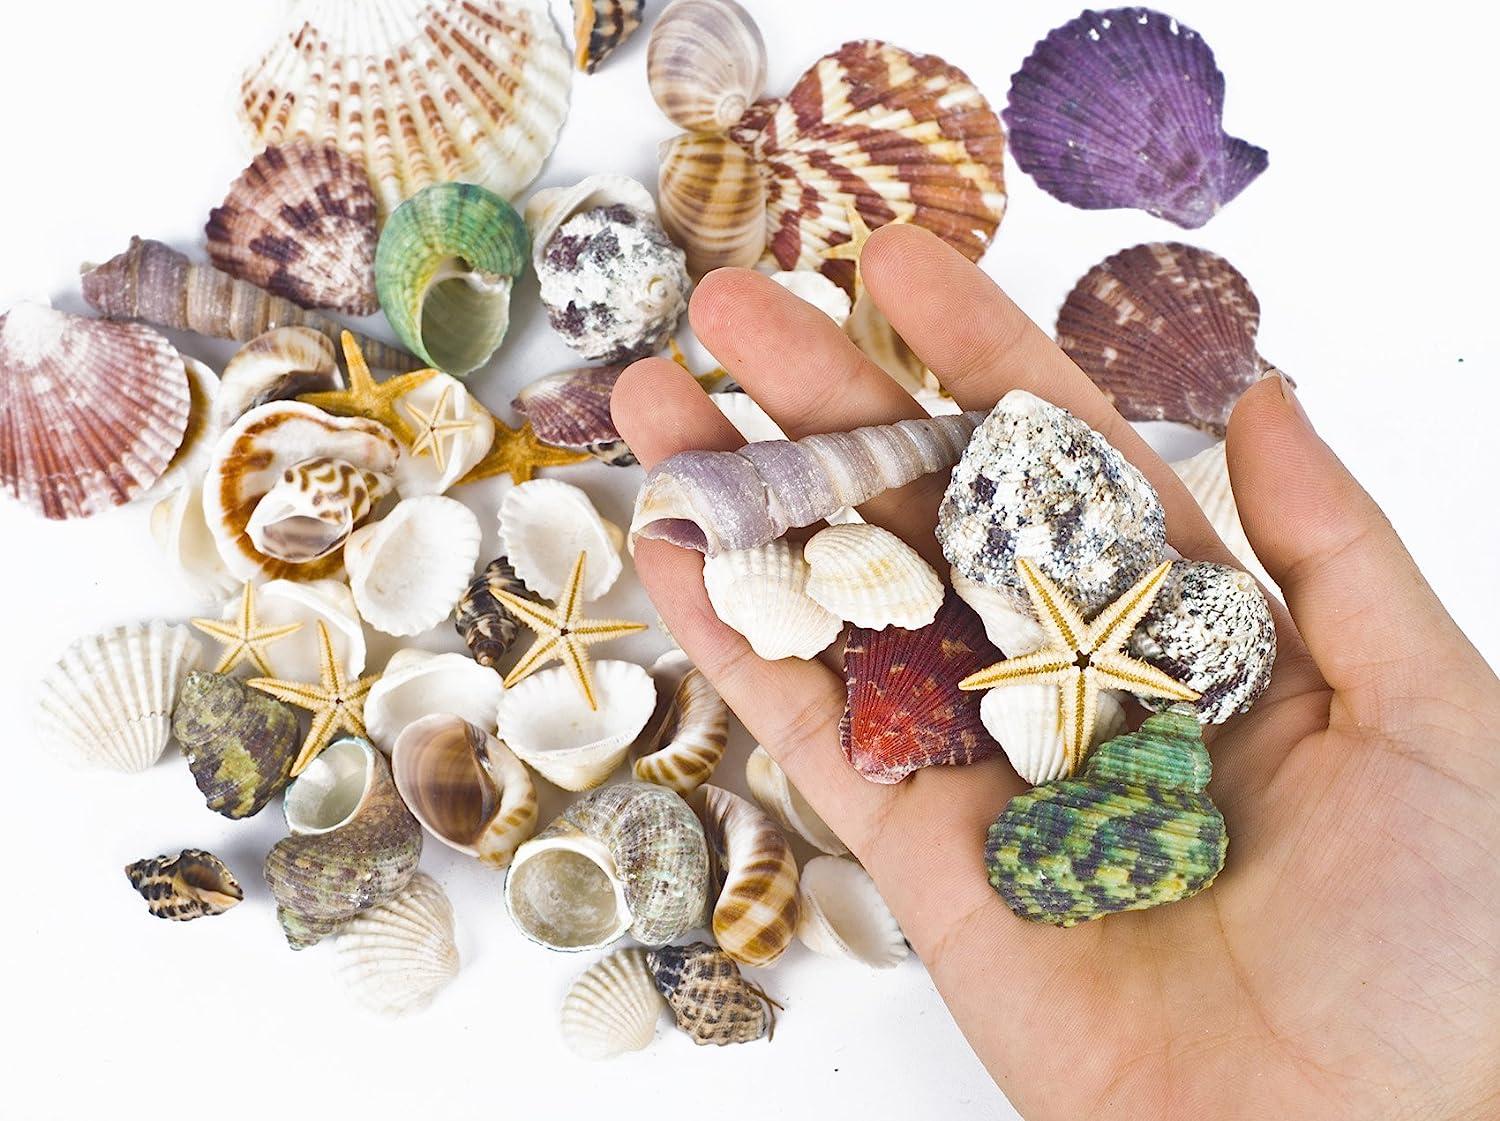 WEOXPR Mixed Sea Shells, 100+ Pcs Beach Seashells Starfish, Various Sizes  Ocean Seashells for Fish Tank Vase Fillers, Beach Theme Party Wedding  Decor, Candle Making, DIY Crafts, Home Decorations